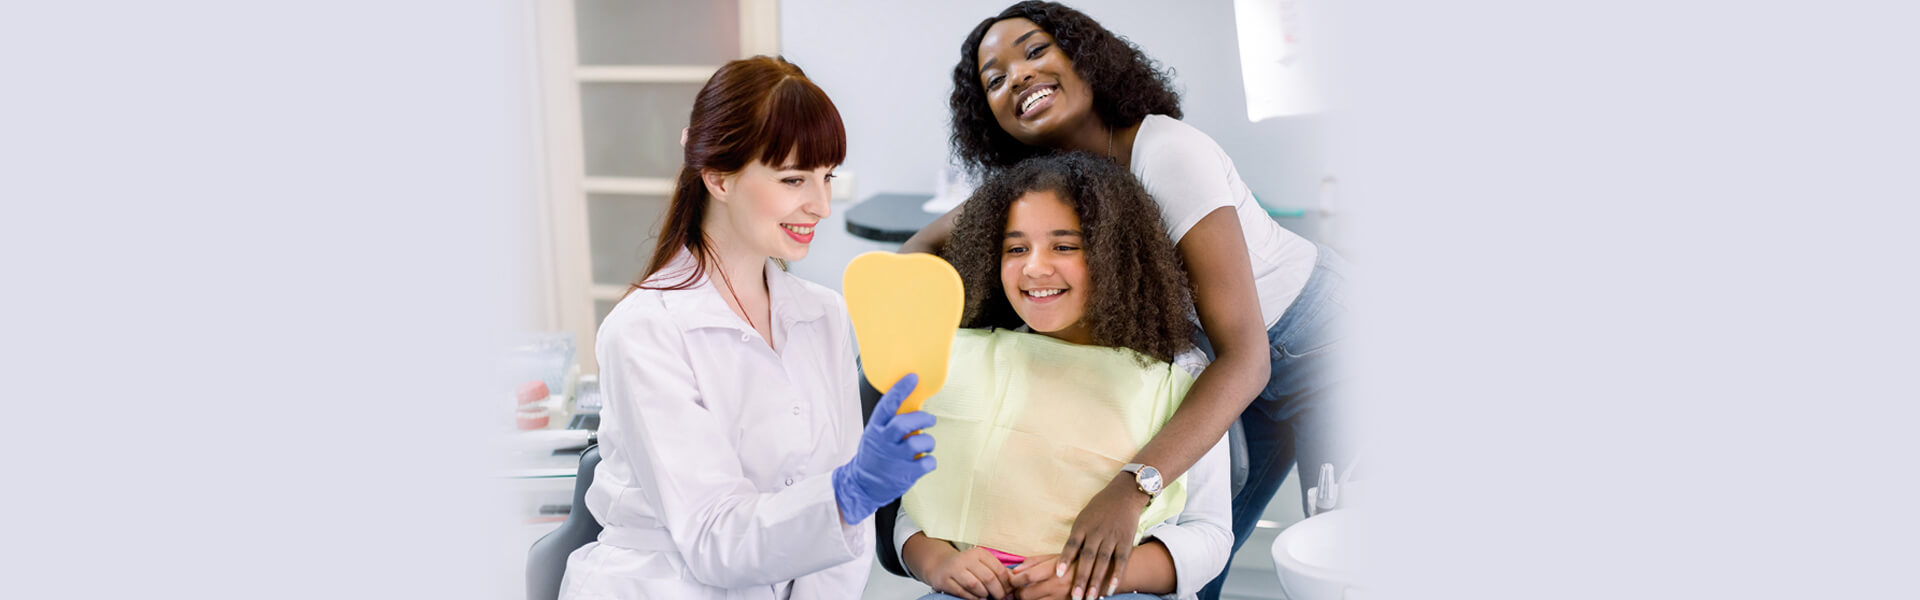 How Often Should I Have a Dental Exam and Cleaning for Good Oral Health?